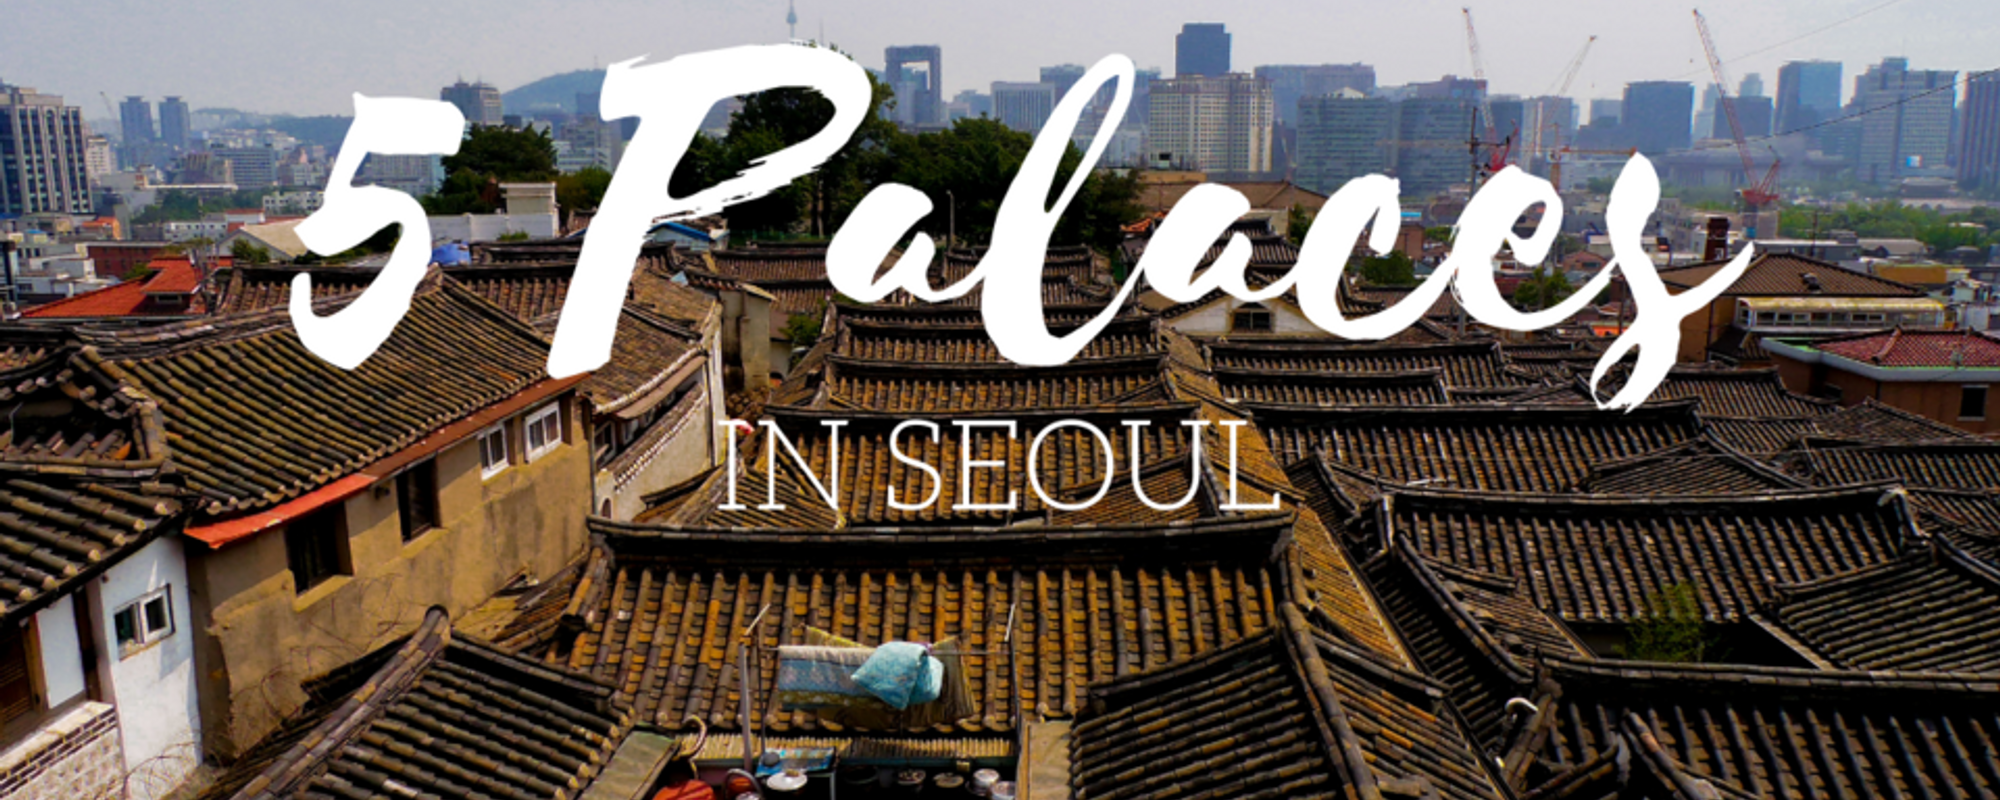 5 palaces to see in Seoul